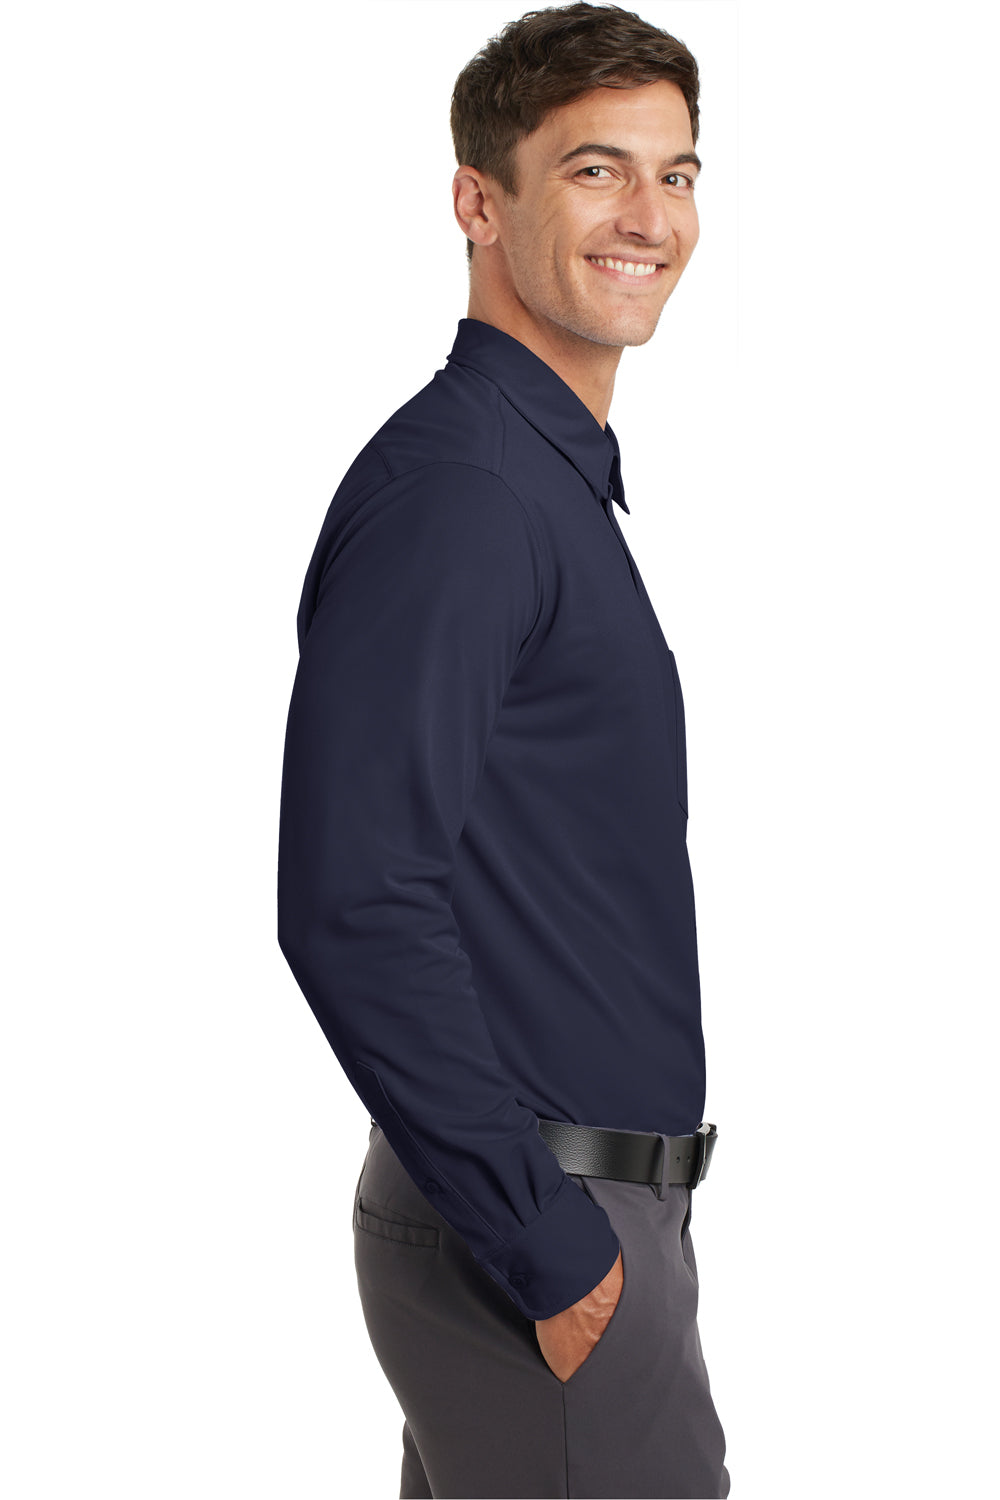 Port Authority K570 Mens Dimension Moisture Wicking Long Sleeve Button Down Shirt w/ Pocket Navy Blue Side